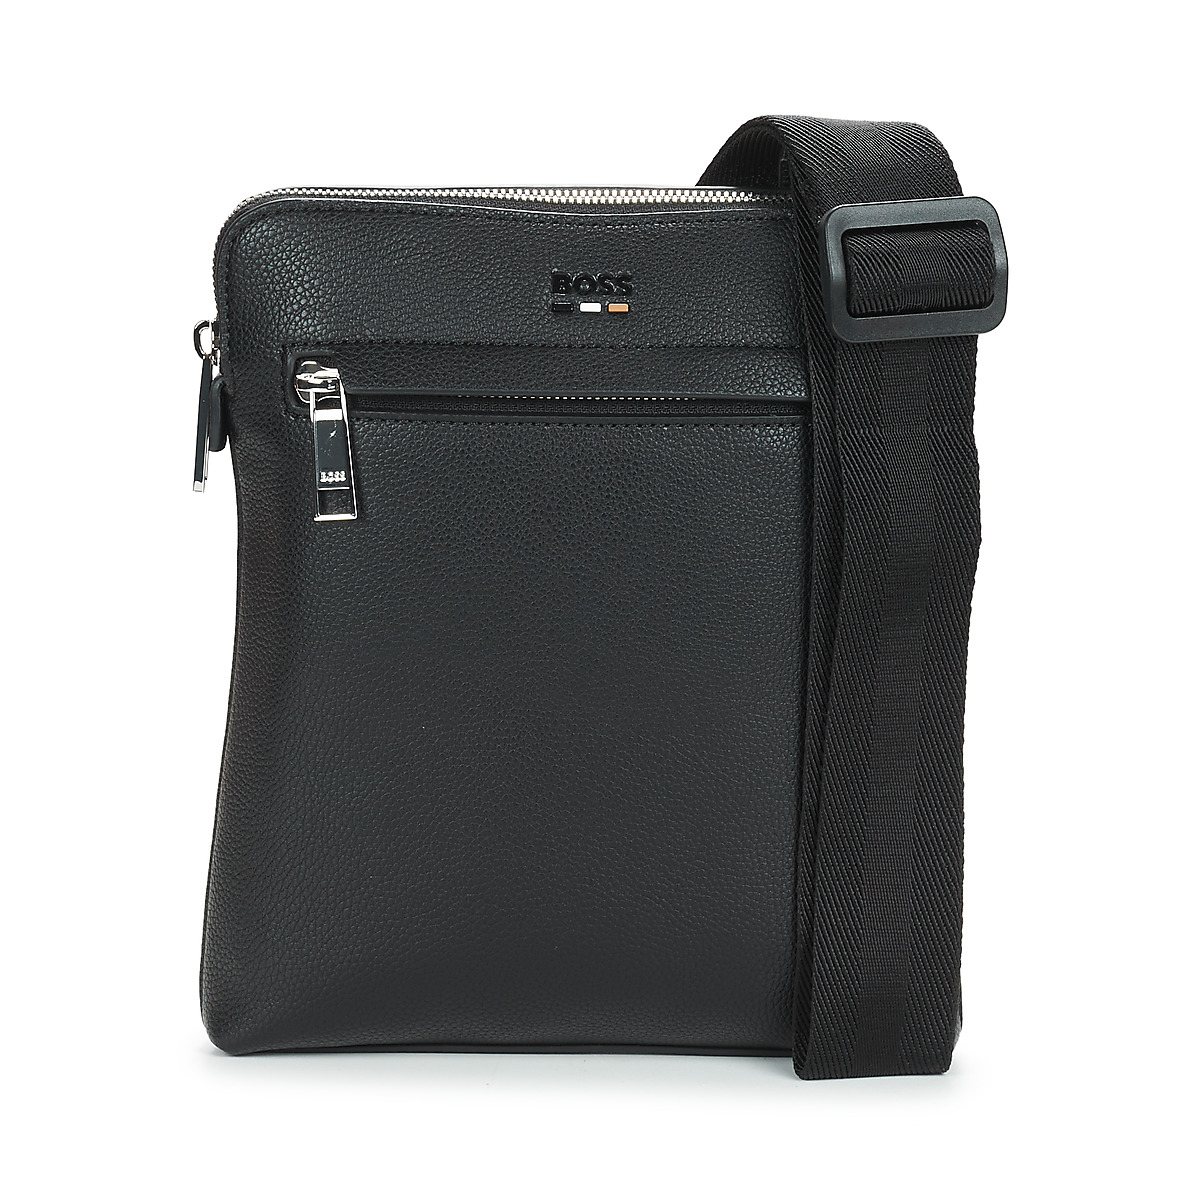 BOSS Ray_S zip env Black - Fast delivery | Spartoo Europe ! - Bags Pouches  / Clutches Men 109,00 €